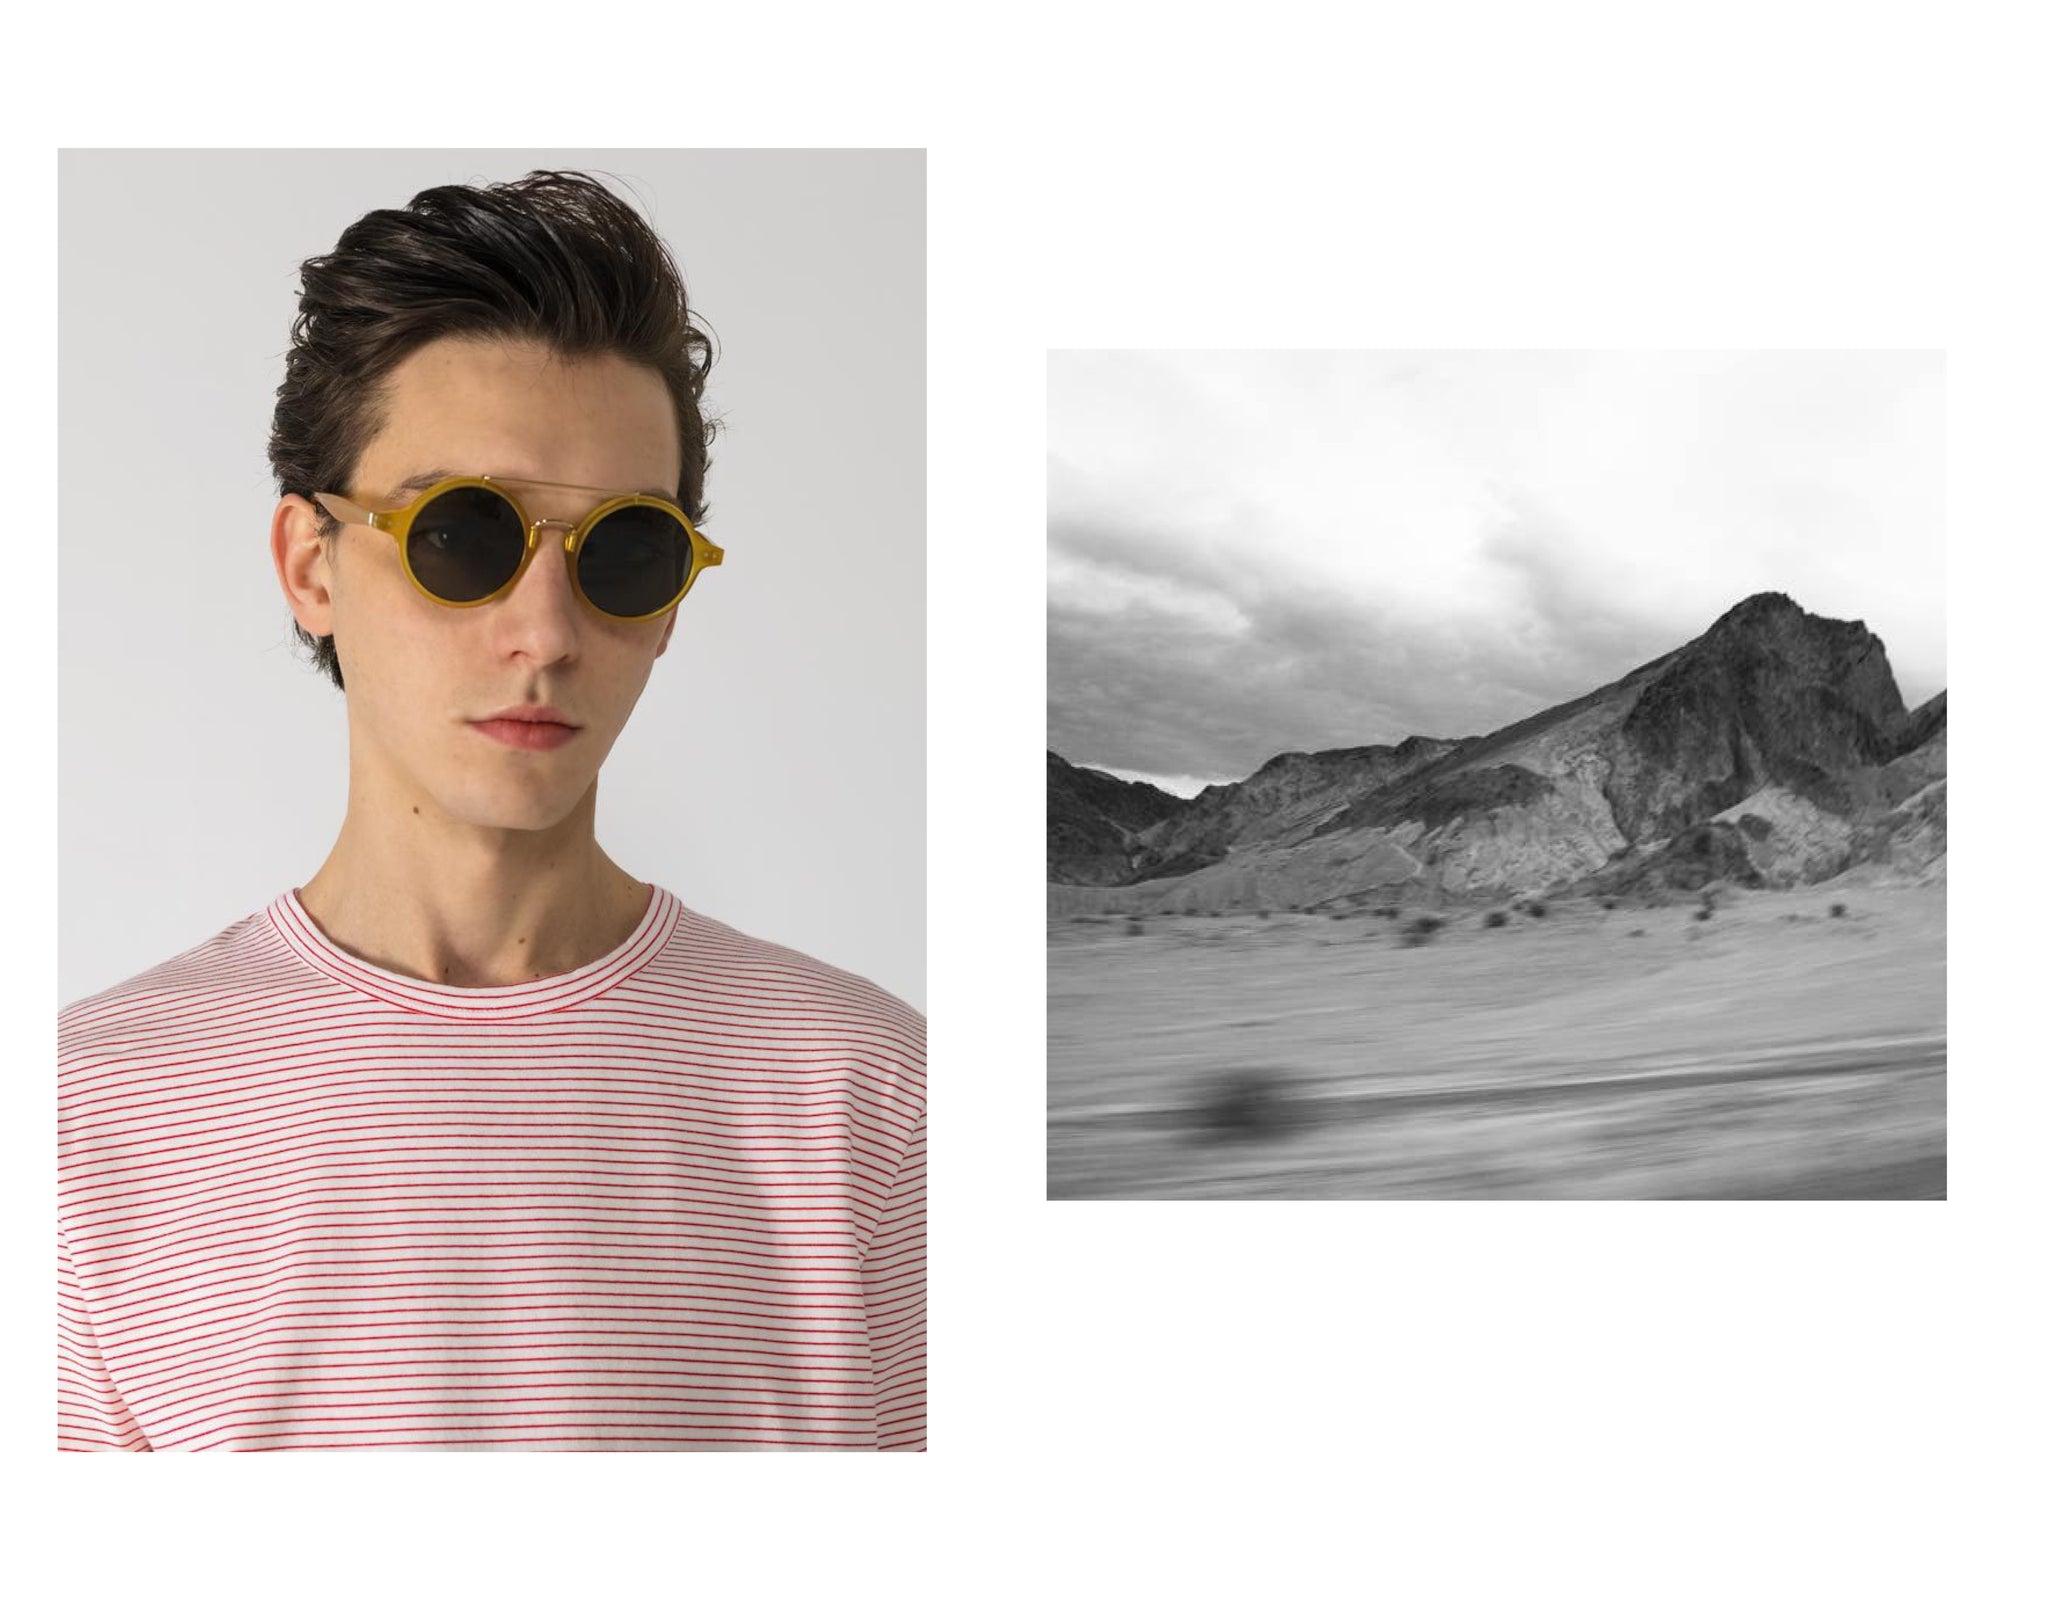 Upper of model wearing designer glasses and N.S horizontal pinstripe in red and white. feat beside black and white desert image (mountain range and sweaping wind storm